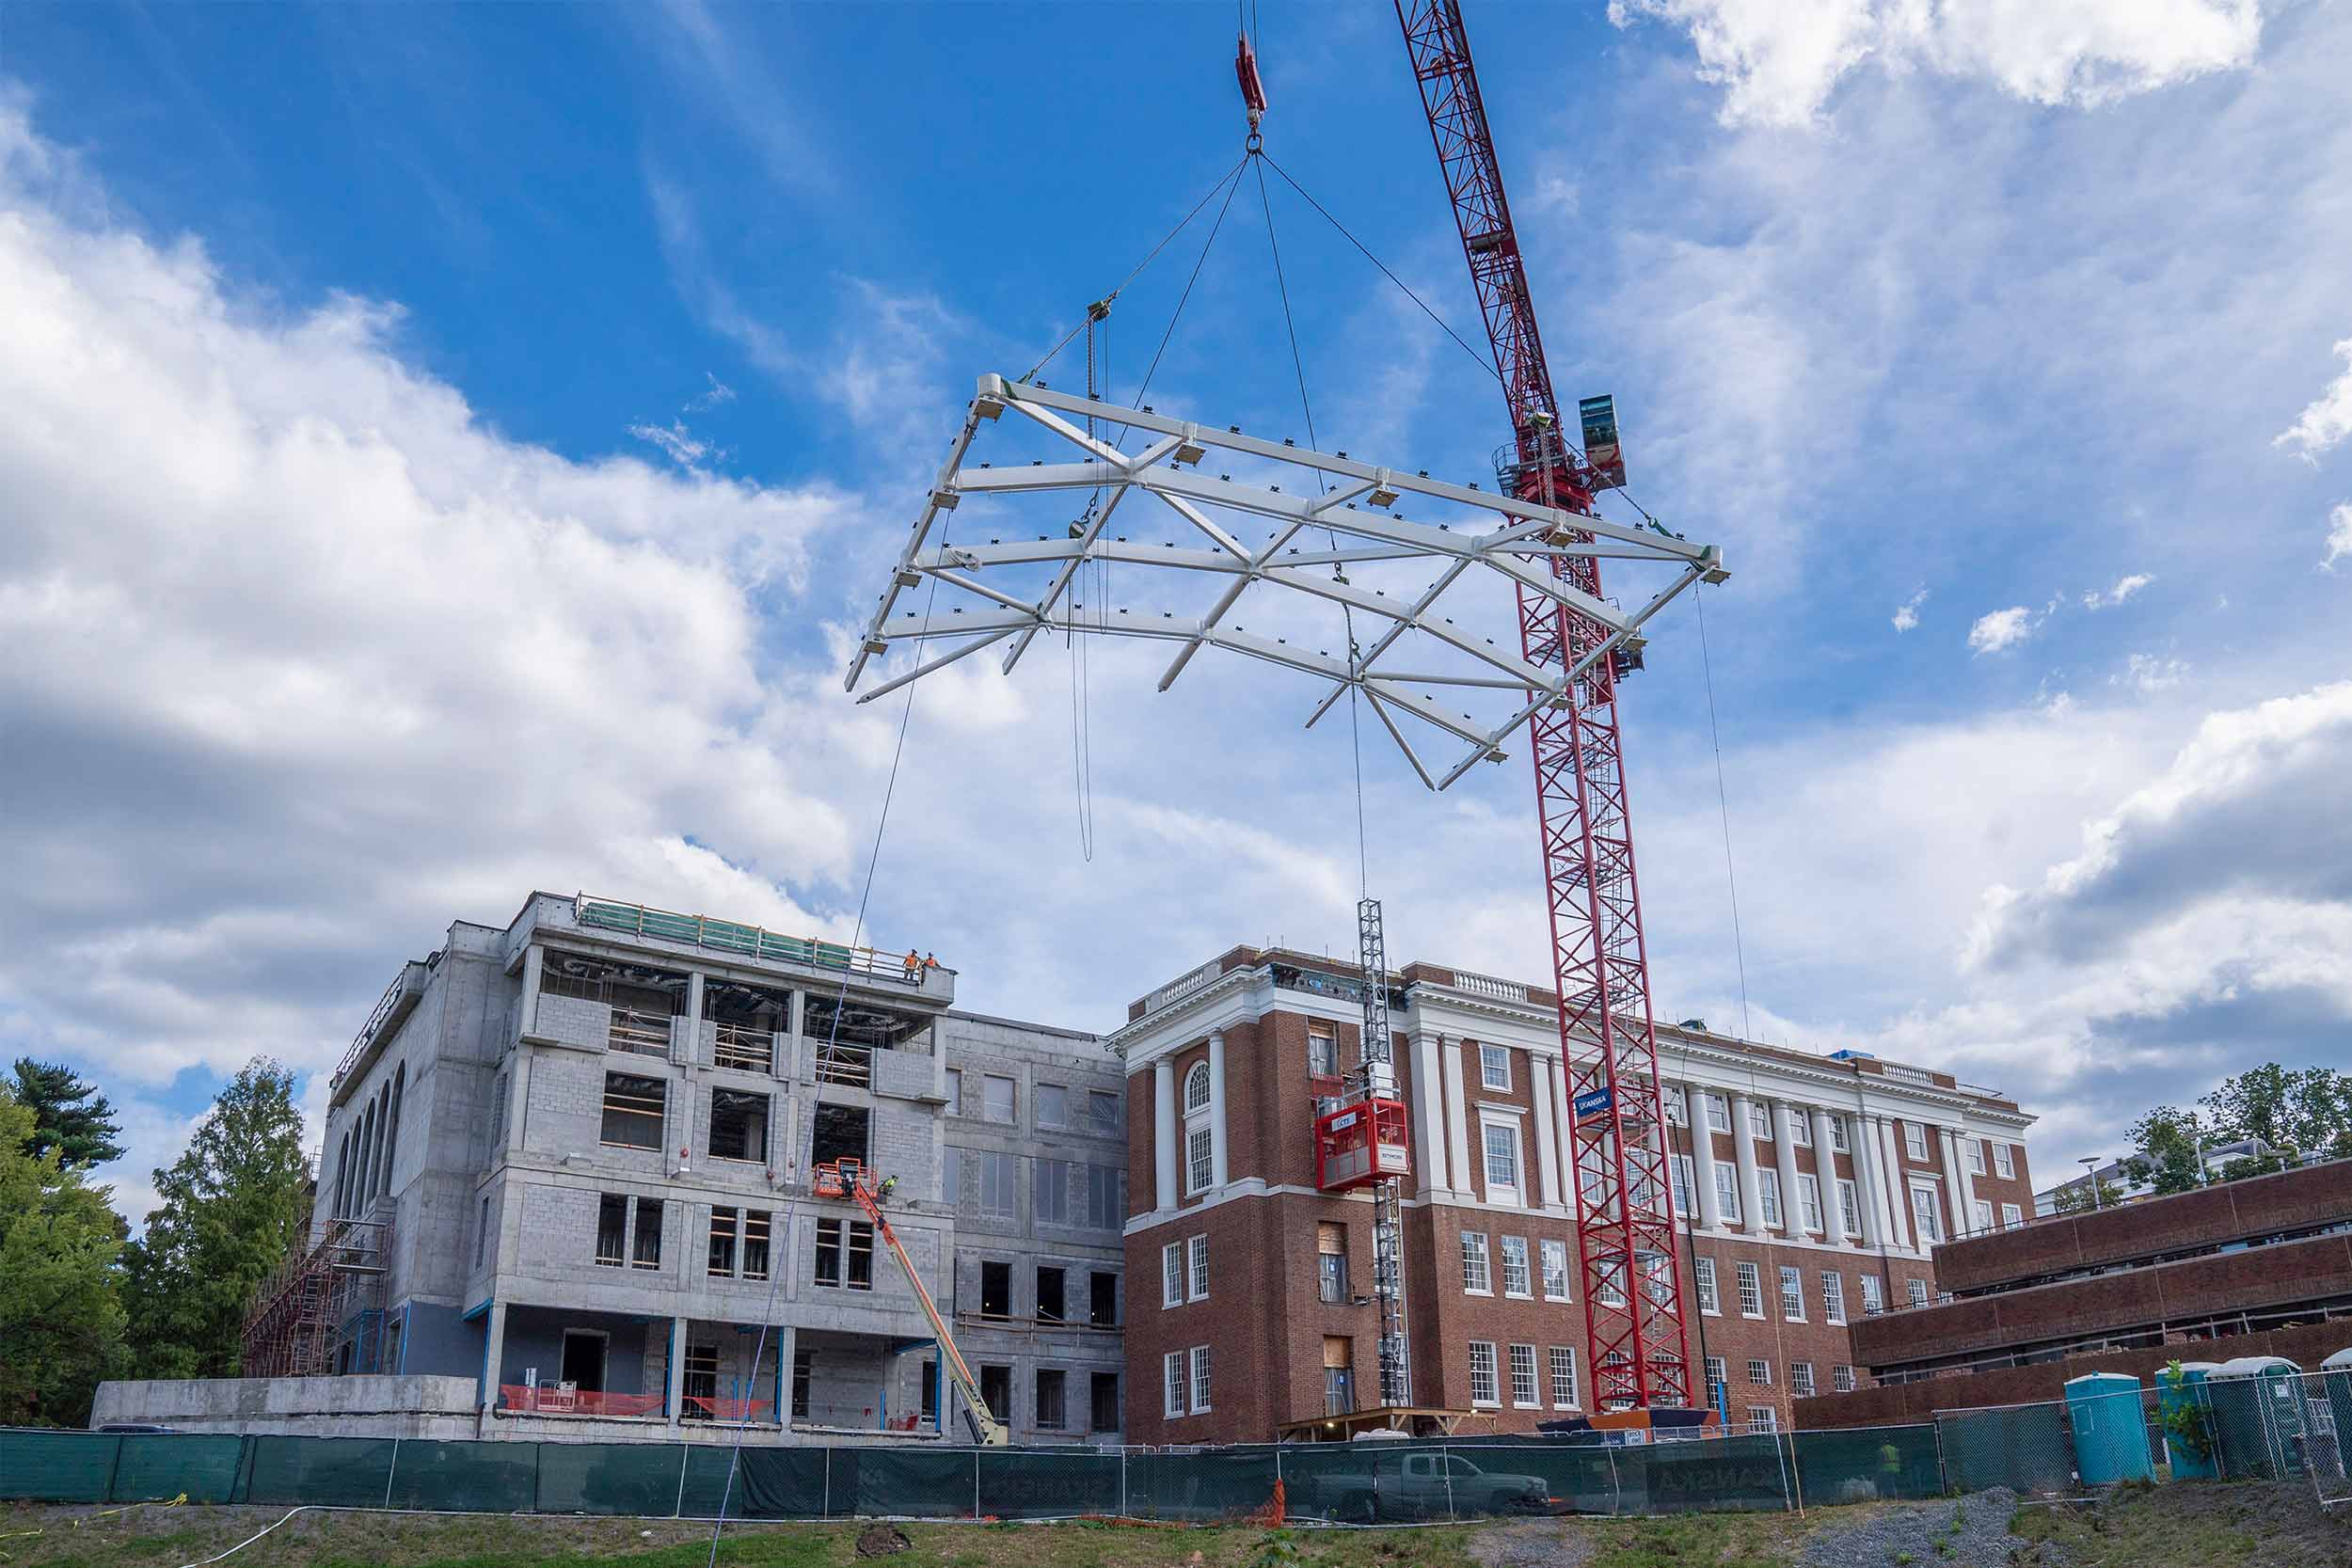 A massive crane lifts a metal structure up and over a rectangular building which is partially under construction